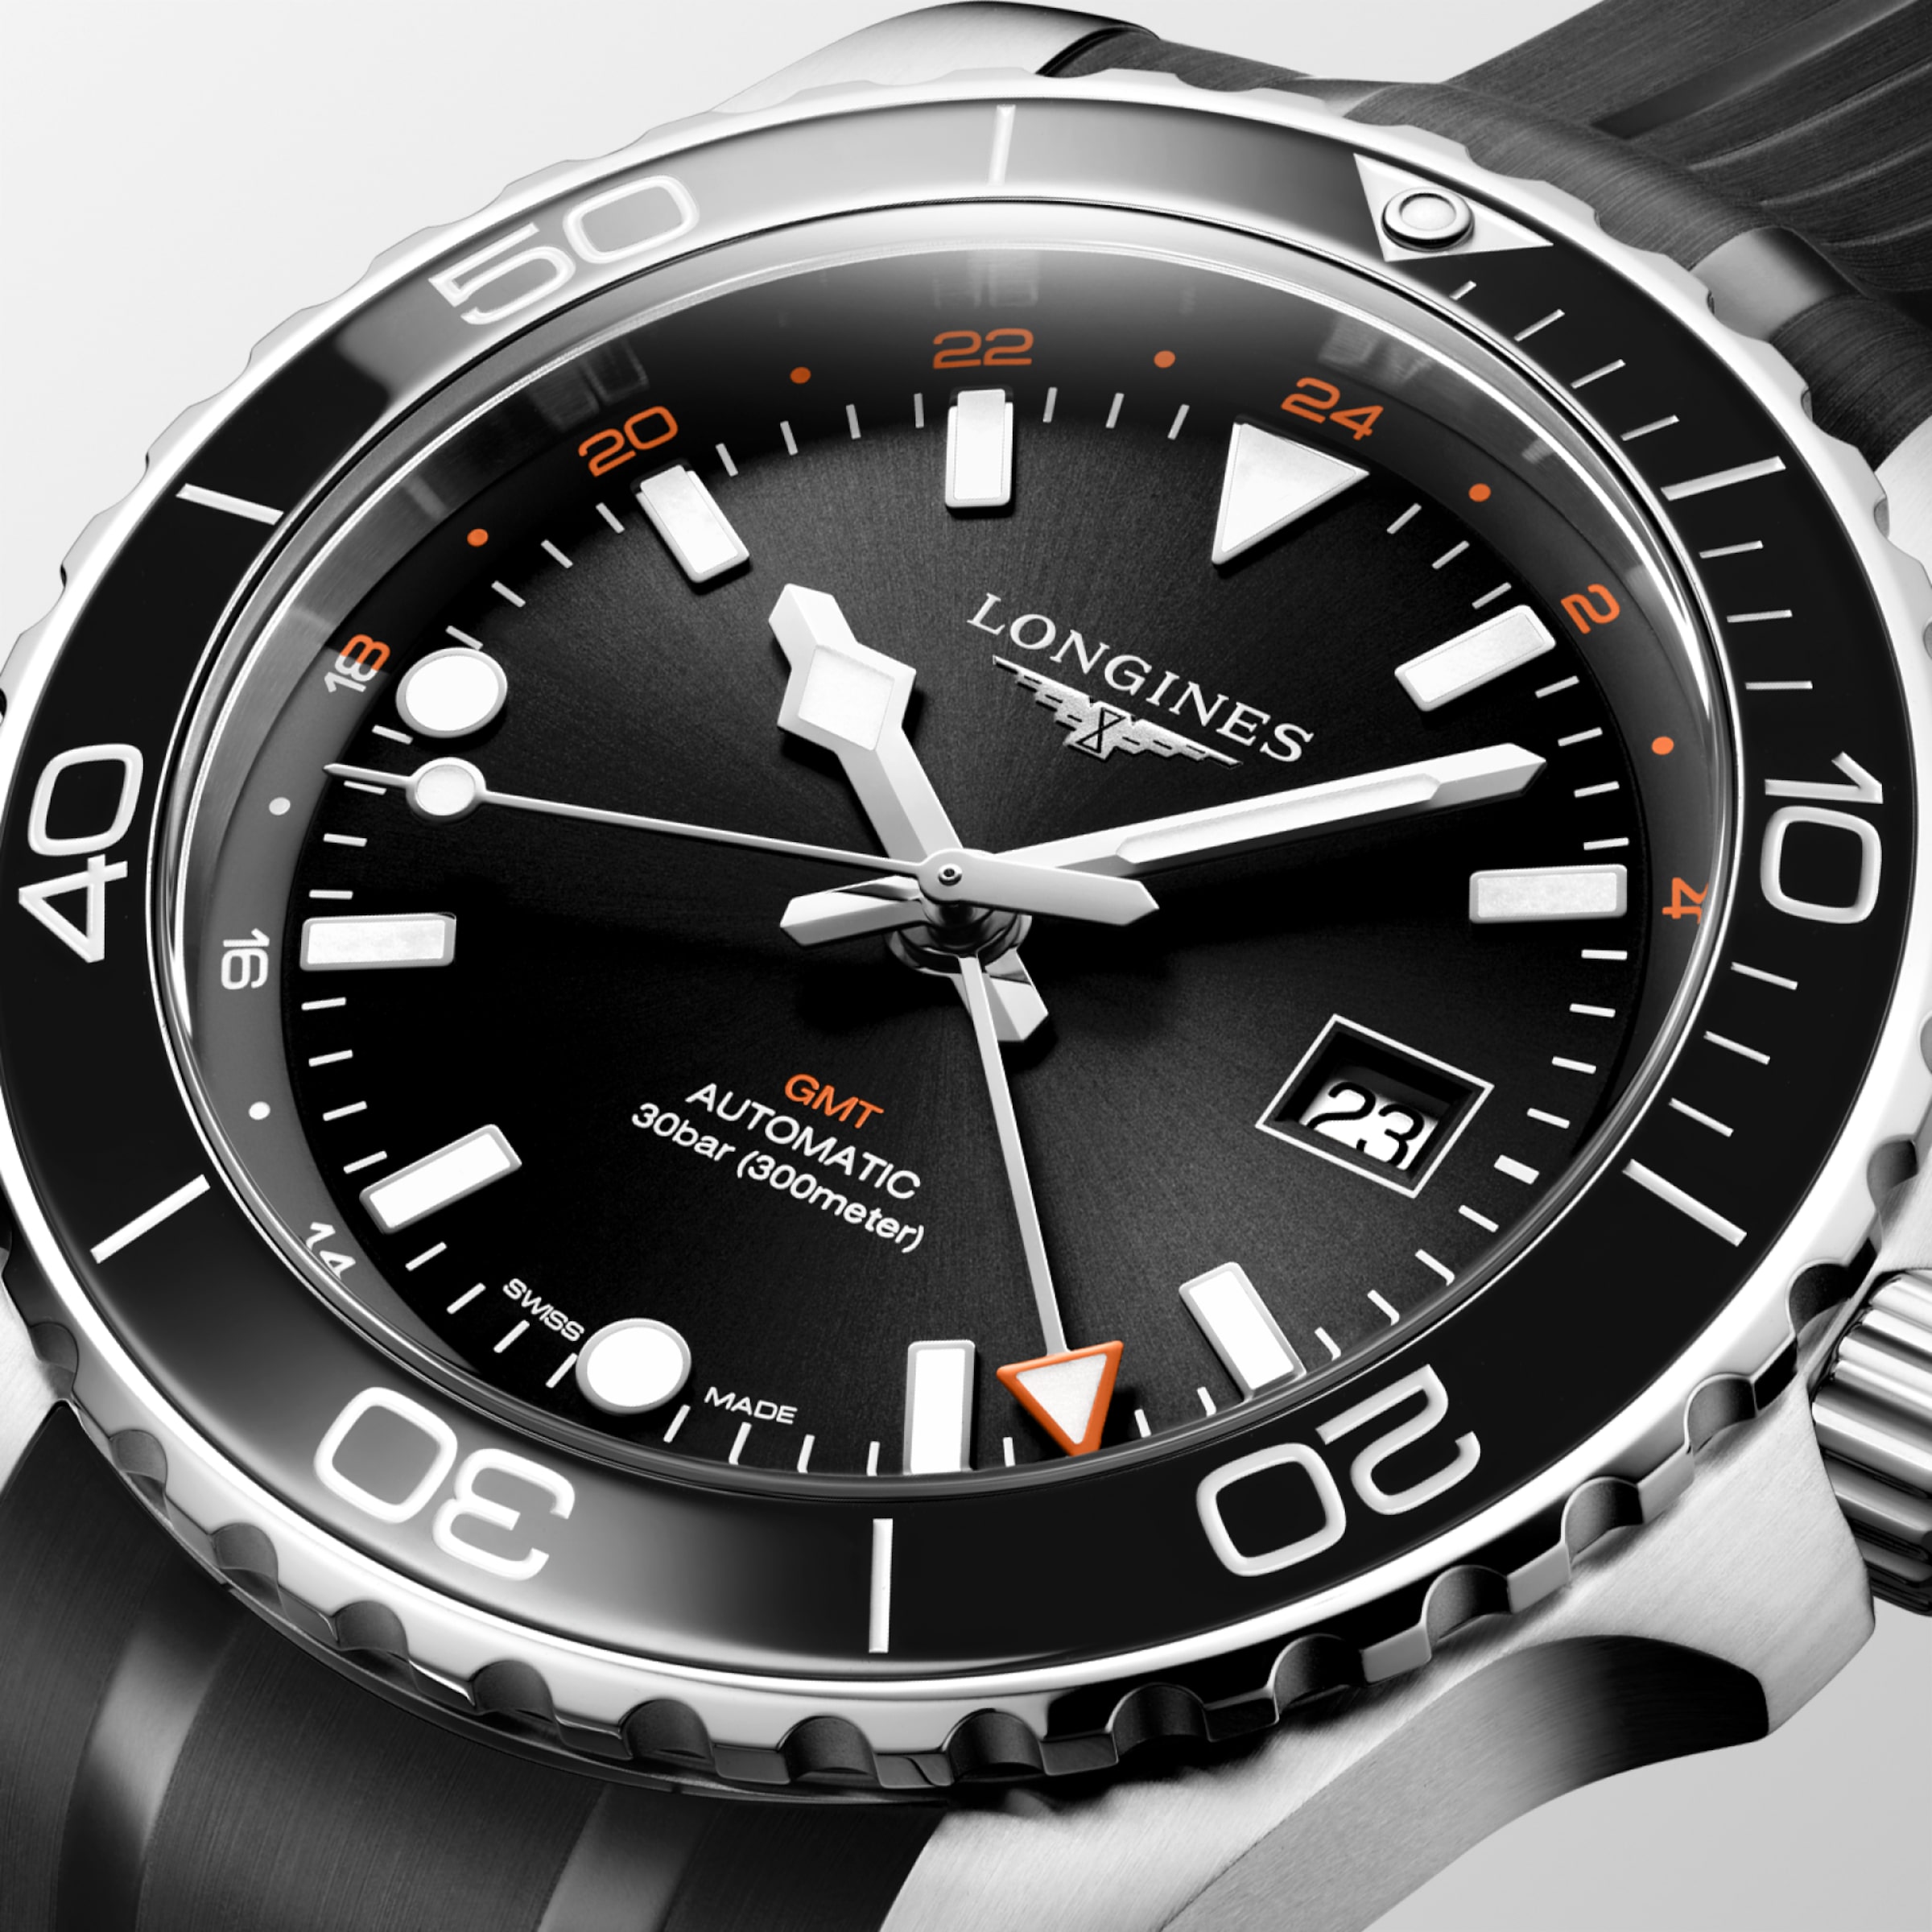 Longines HYDROCONQUEST Automatic Stainless steel and ceramic bezel Watch - L3.890.4.56.9